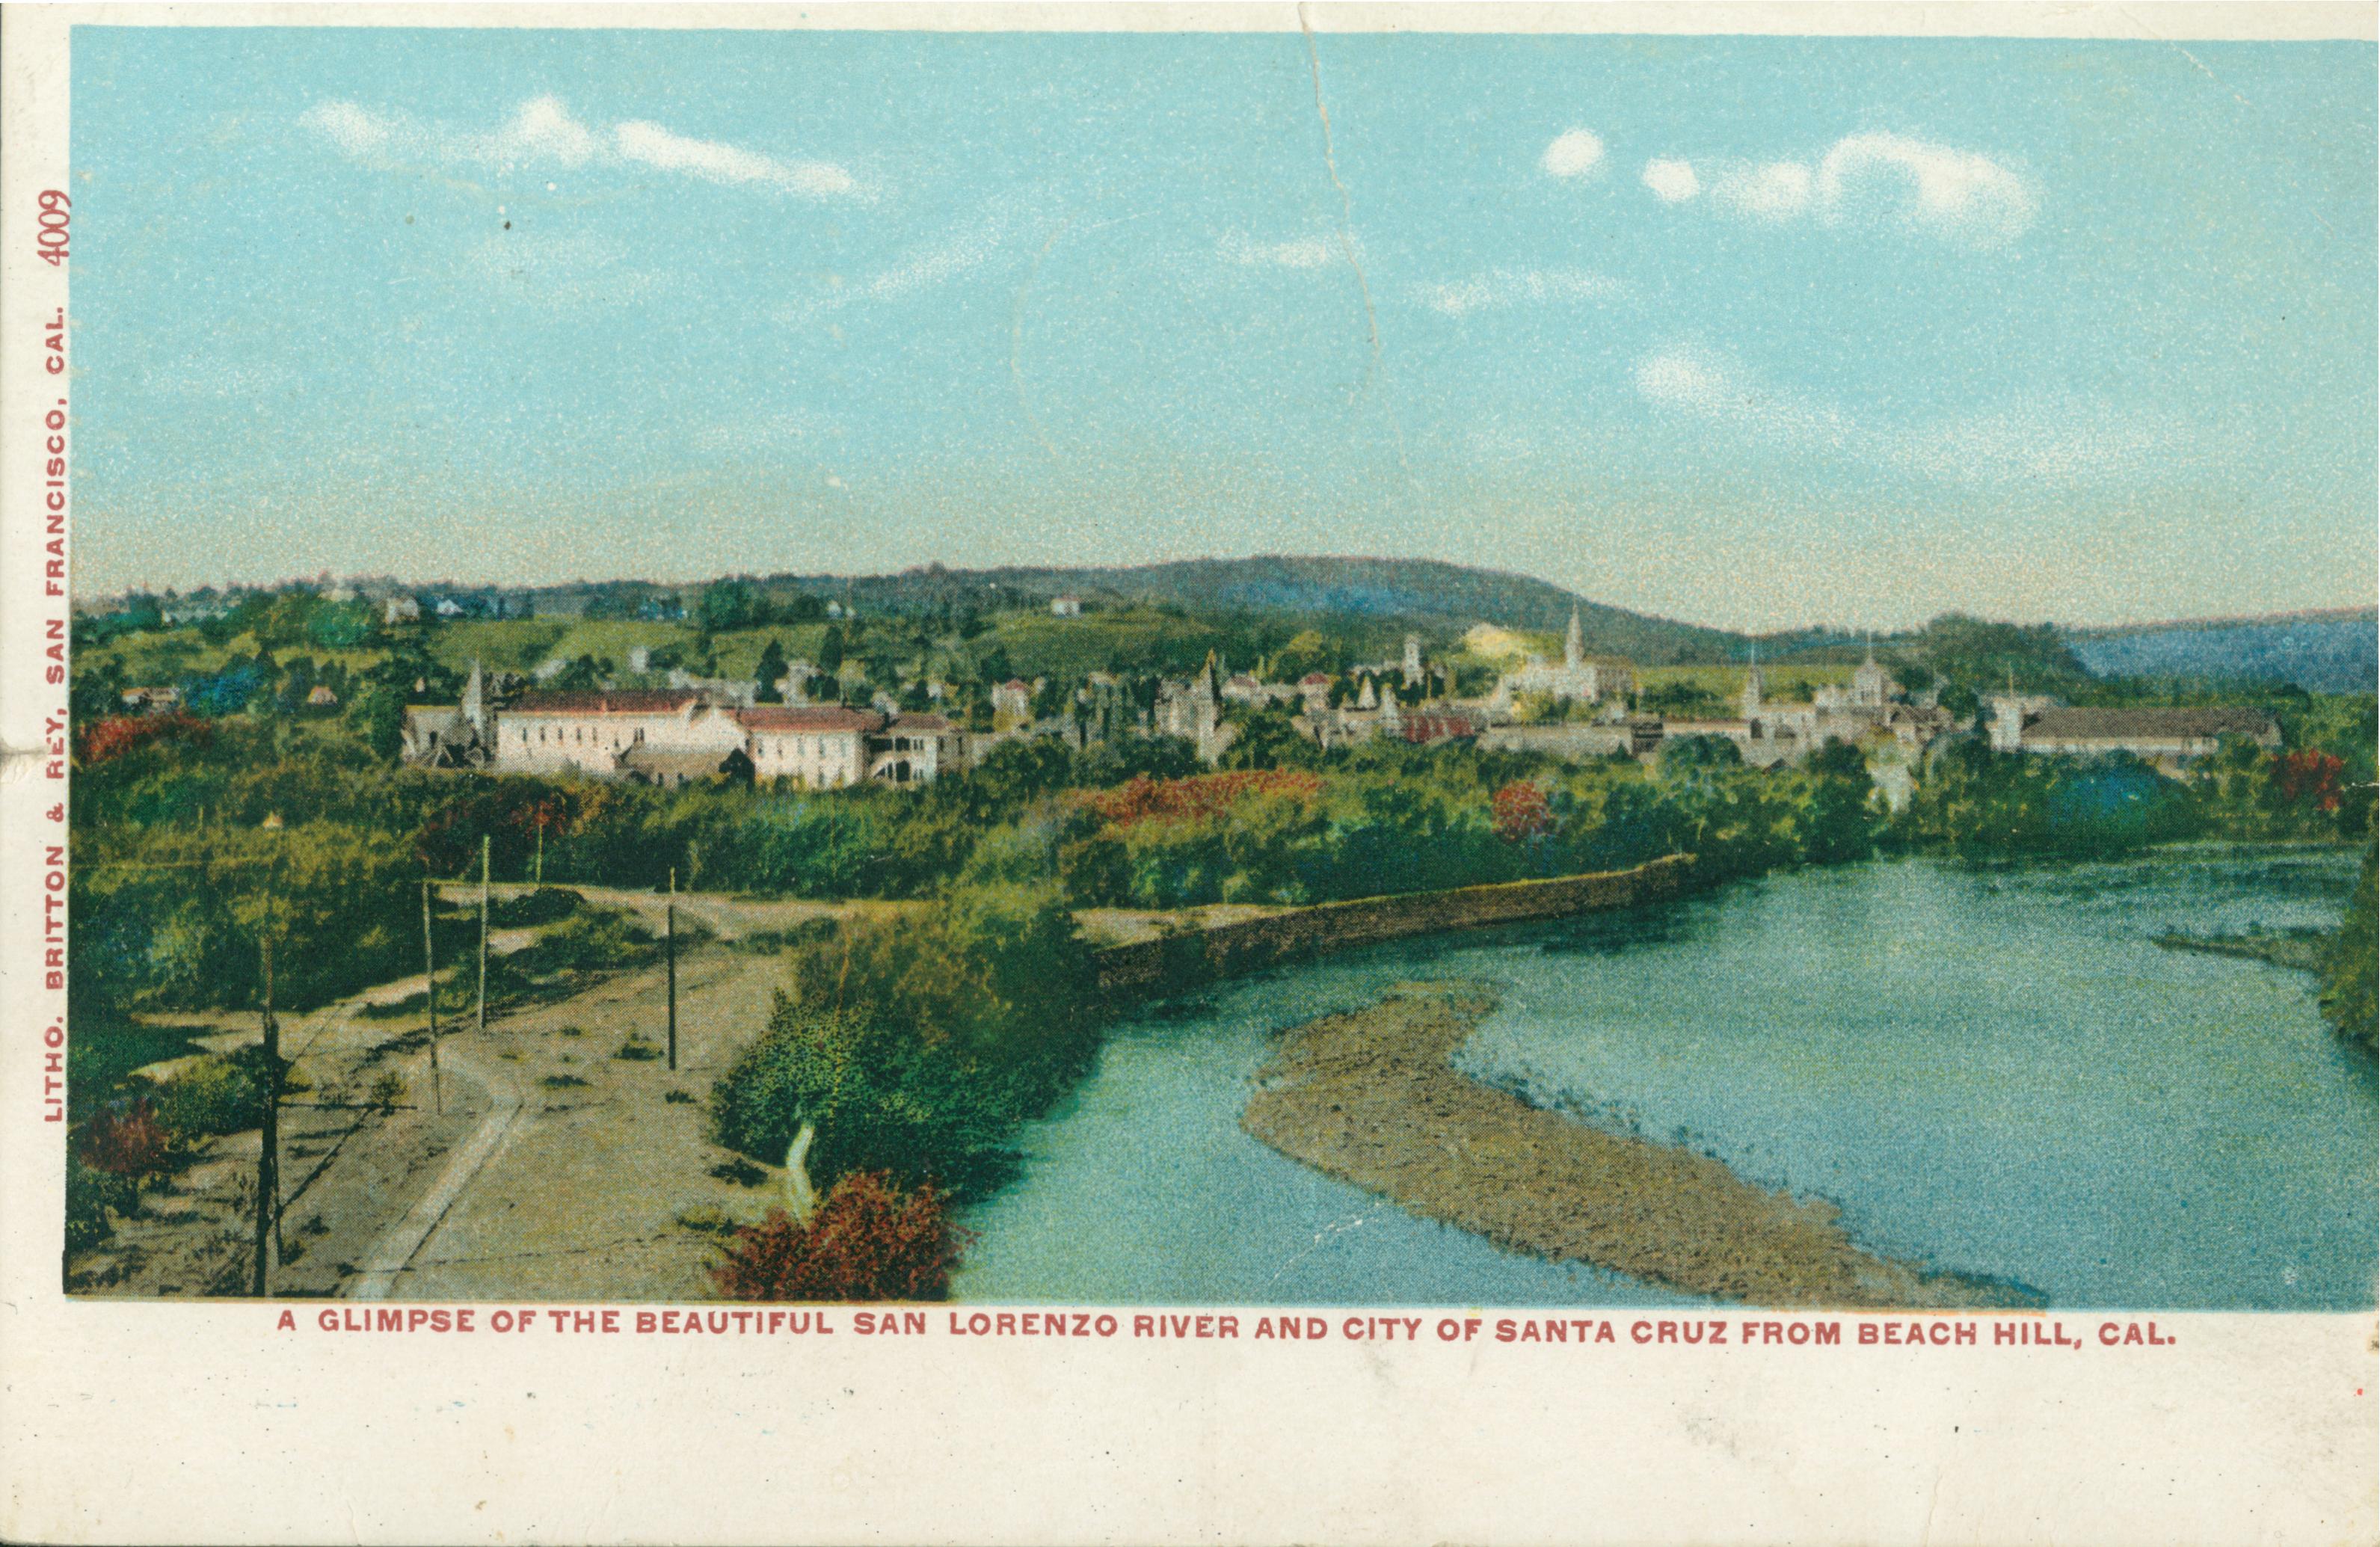 Shows a bird's eye view of Santa Cruz with the San Lorenzo river to the right with railroad tracks in the foreground